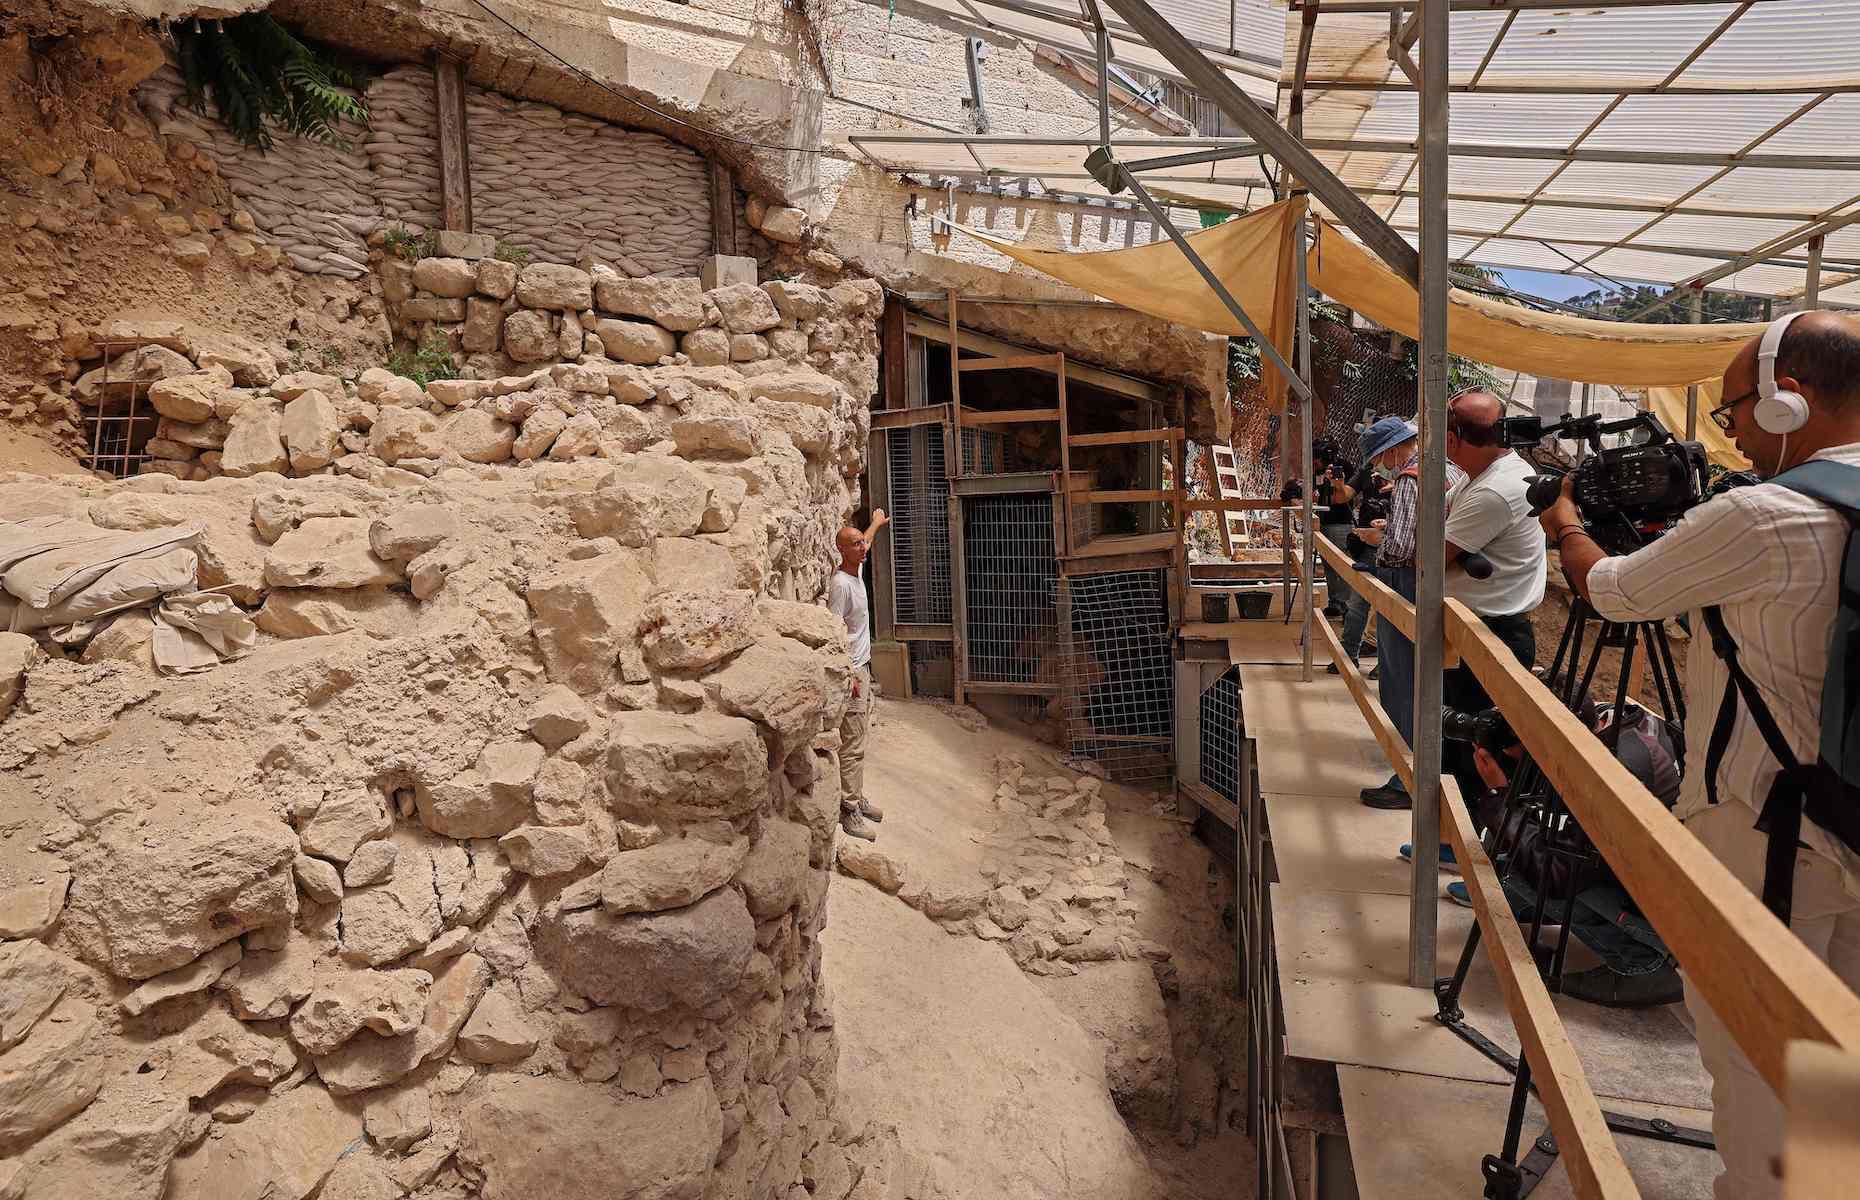 <p>Israel Antiquities Authority archaeologists working at the City of David National Park in the Old City of Jerusalem discovered what they believe is <a href="https://www.israeltoday.co.il/read/found-missing-section-of-first-temple-period-jerusalem-city-wall/">a missing section of Jerusalem’s outer city wall</a>, part of the original Iron Age fortifications that were built at least 2,700 years ago. Most of the wall would have been destroyed during a Babylonian invasion in 586 BC, which saw Nebuchadnezzar II plunder the city.</p>